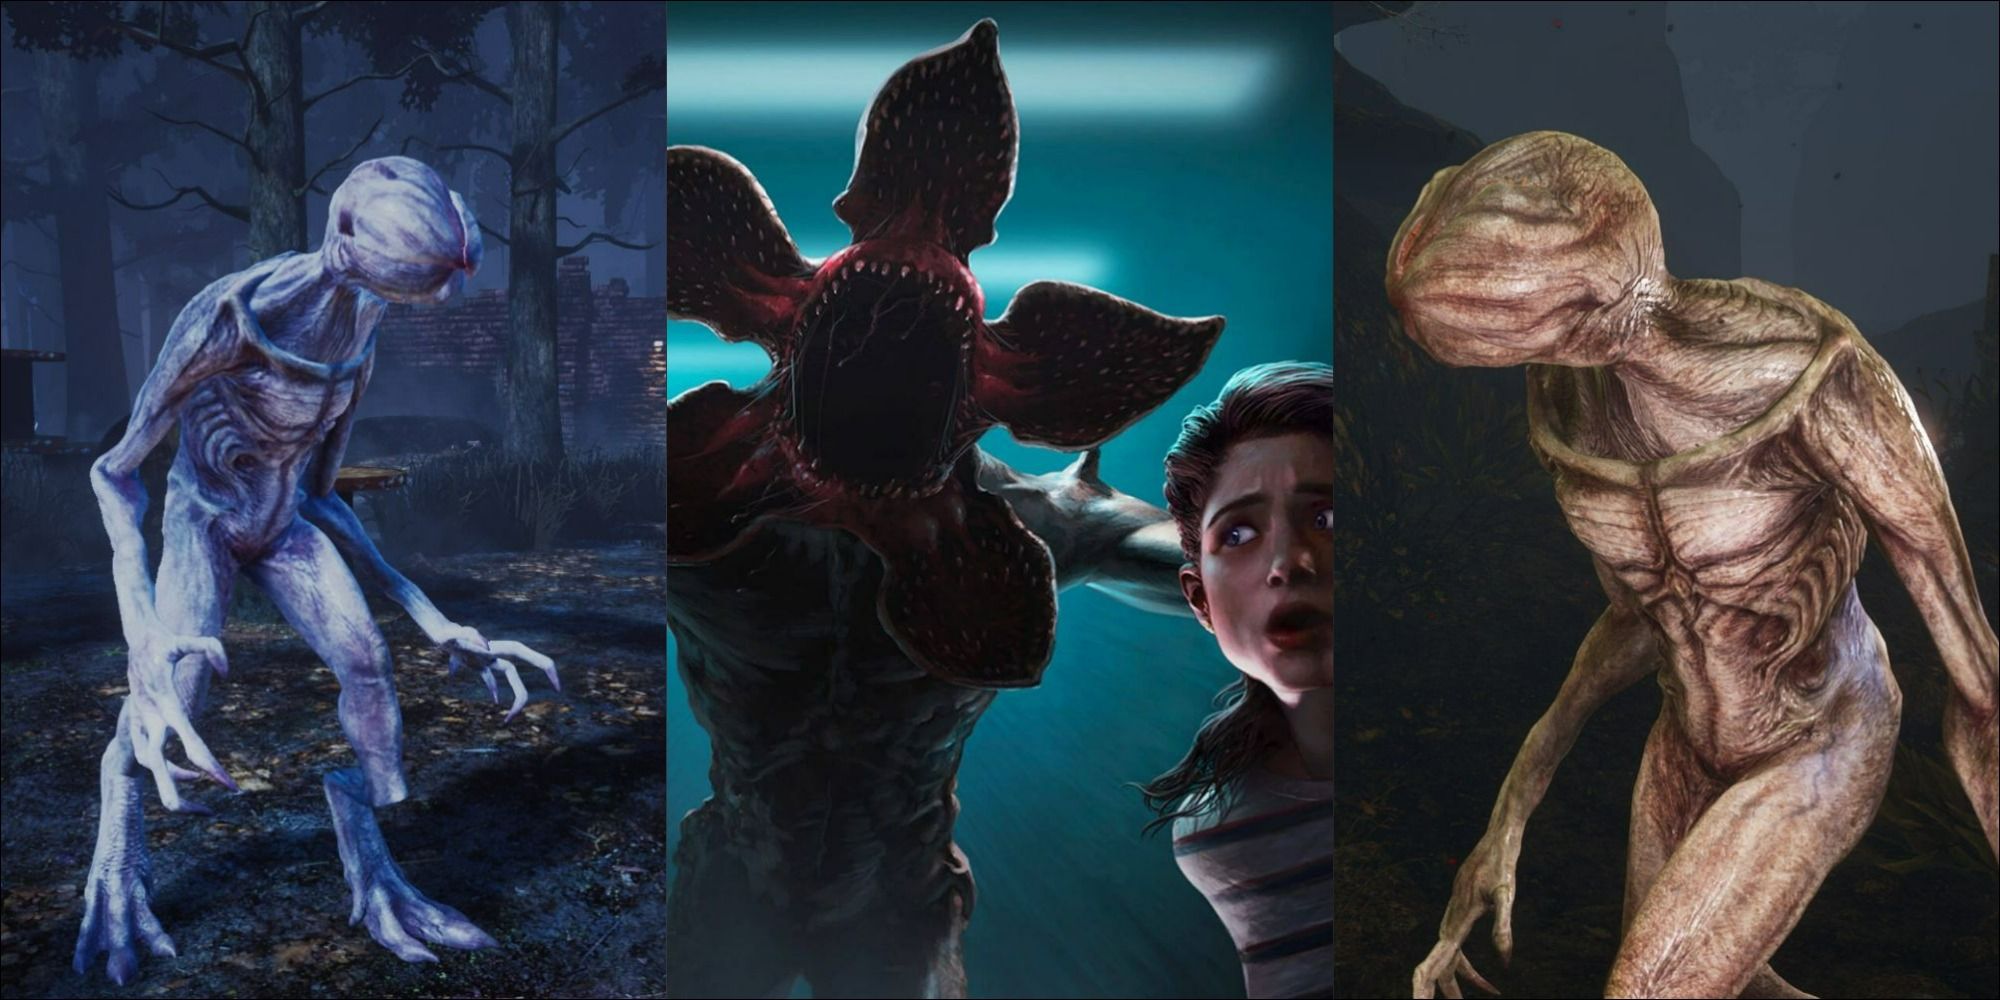 Three images of the Demogorgon from Dead By Daylight